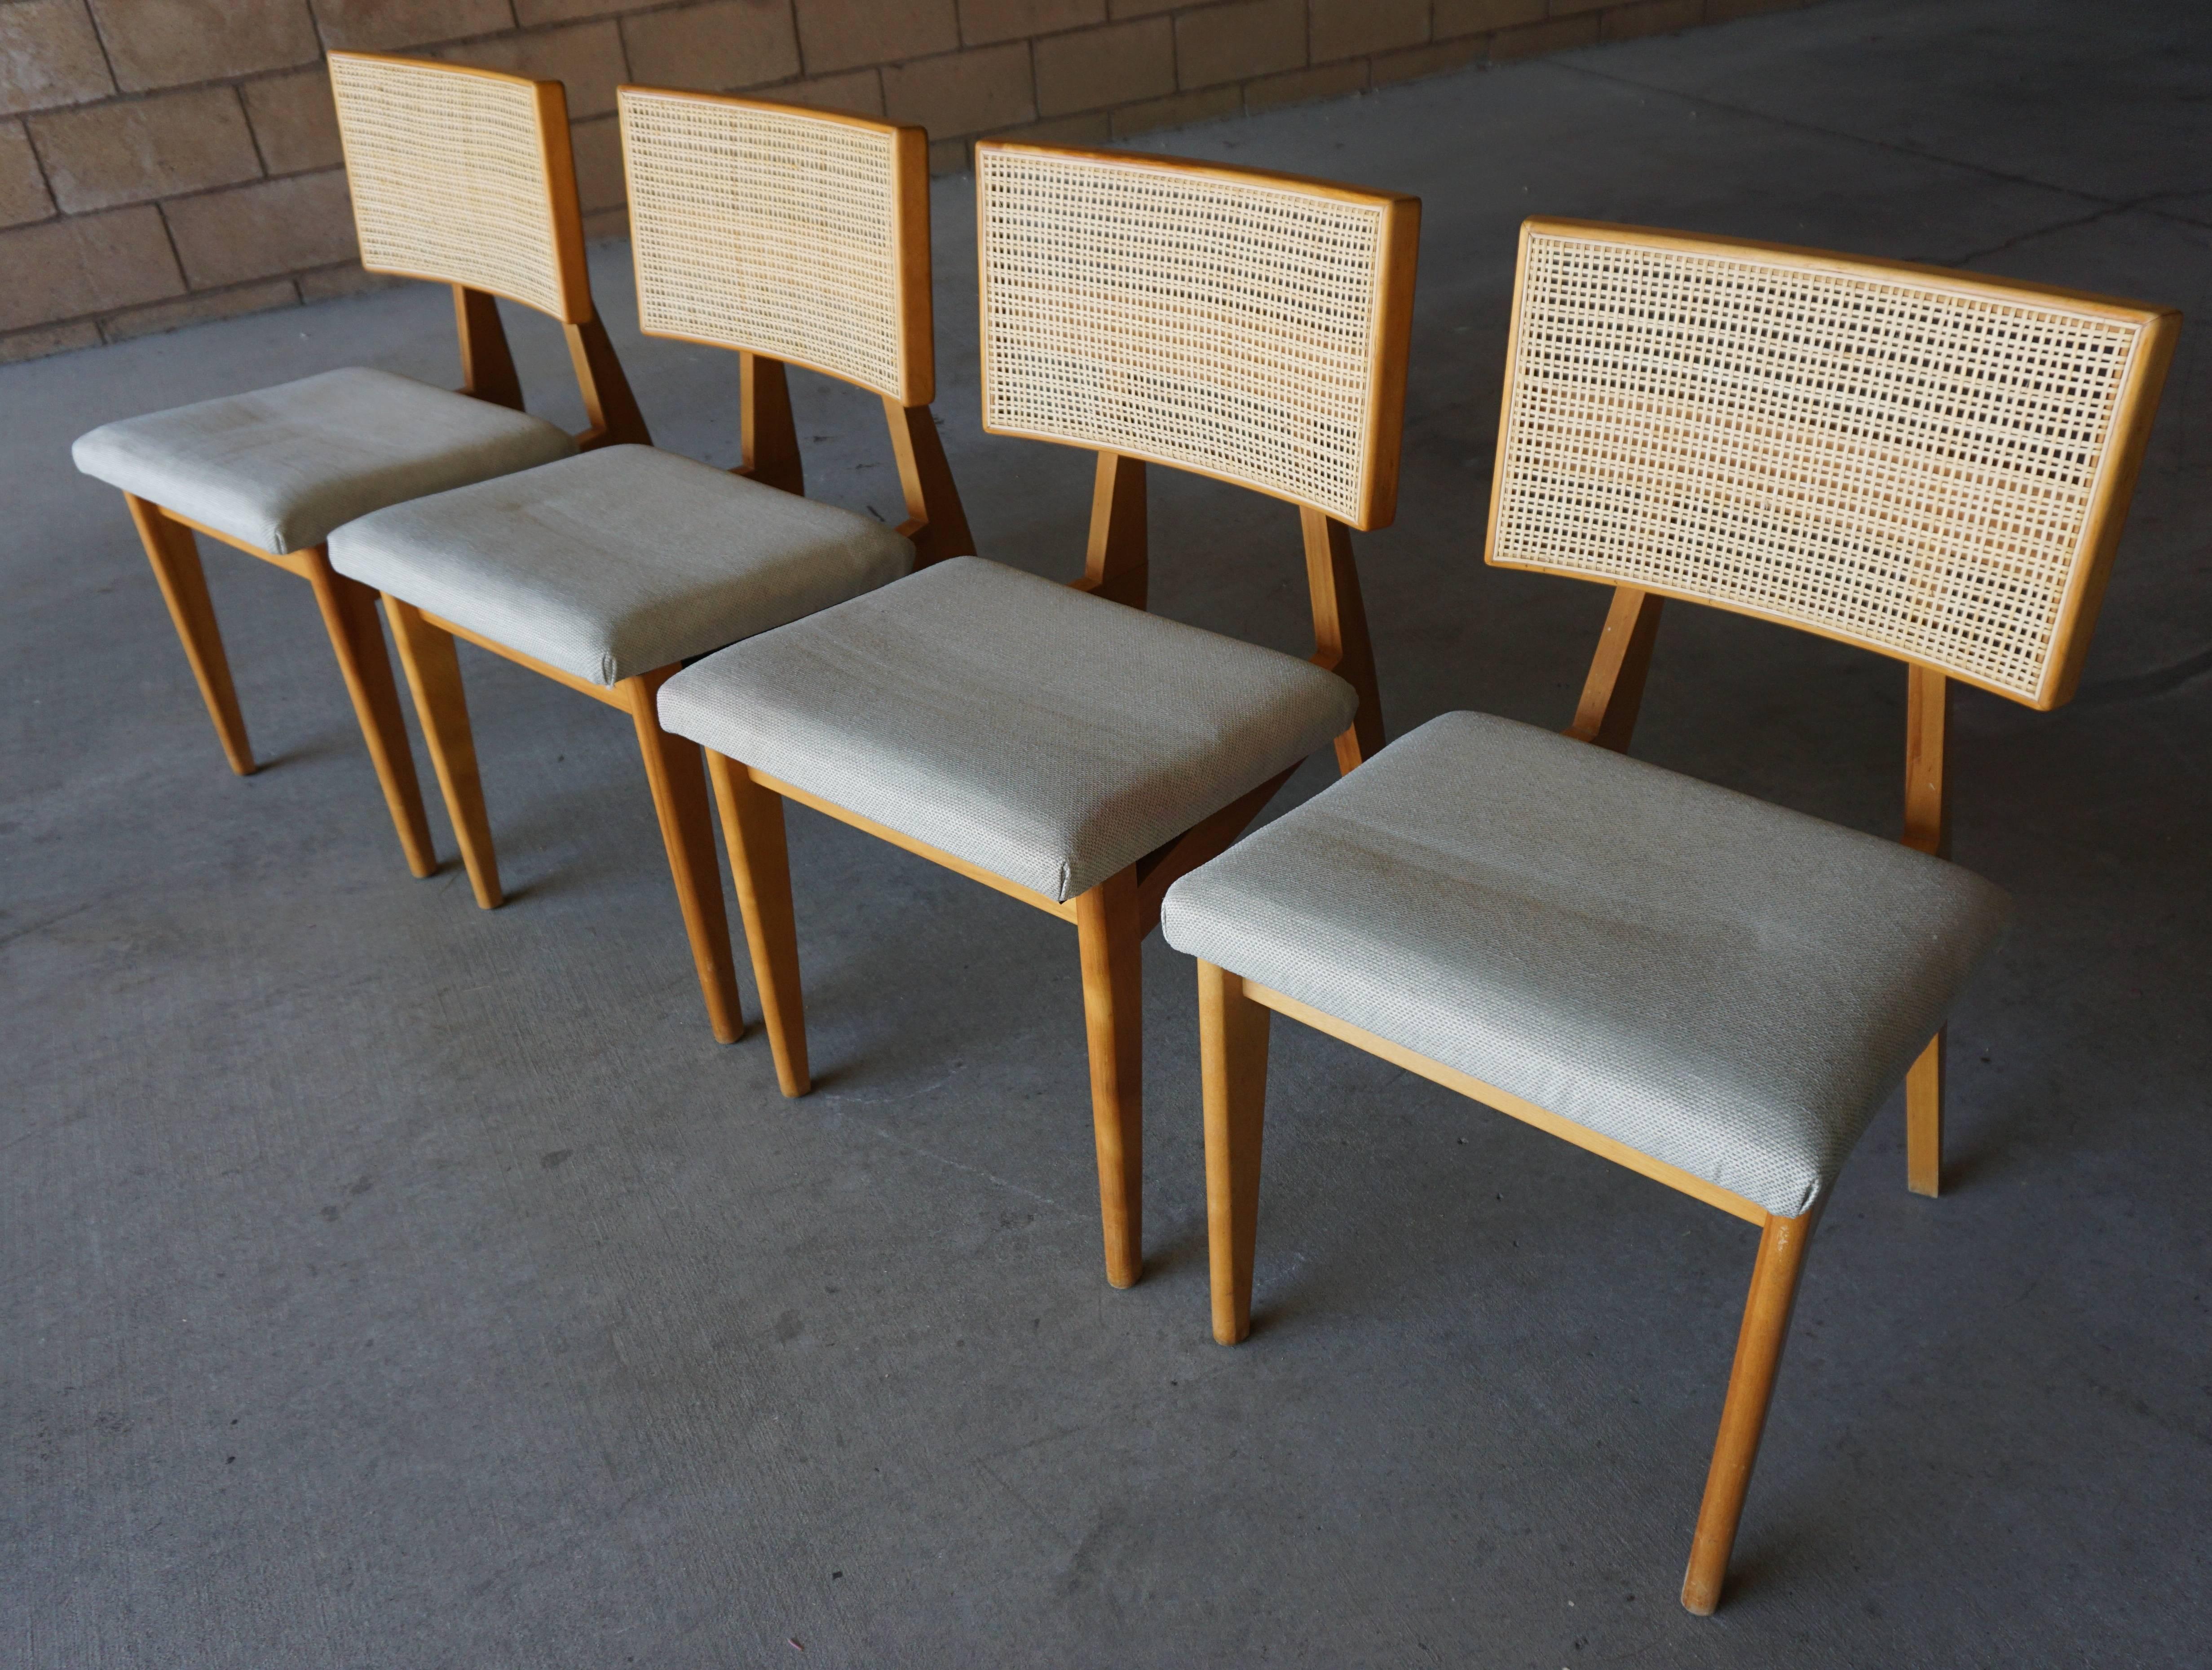 A rare set of 4 American beechwood side chairs with woven cane back rests, designed by George Nelson for Herman Miller in the 1940's. The finish on the wooden sections of the chairs is original and the caning also appears to be the original. The